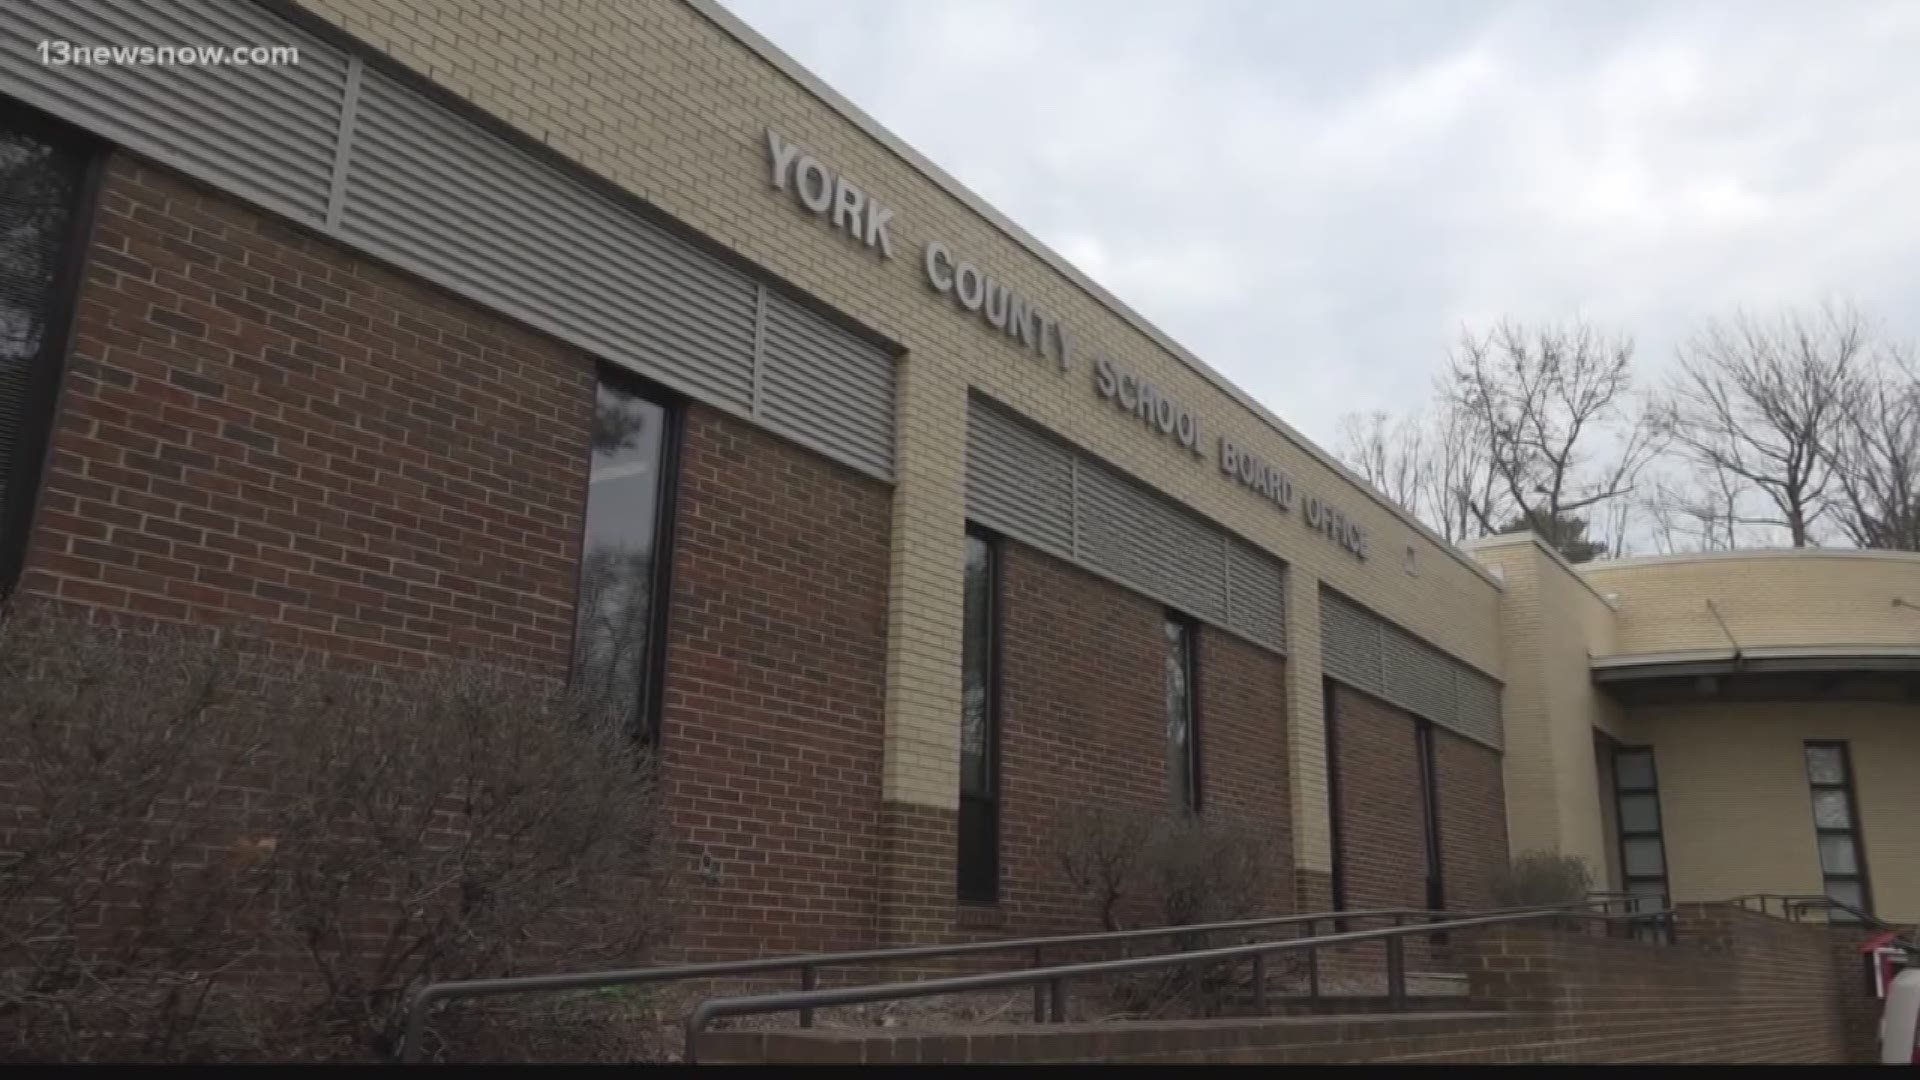 The York County School Board has 45 days to fill a vacant seat after the District 2 representative stepped down.